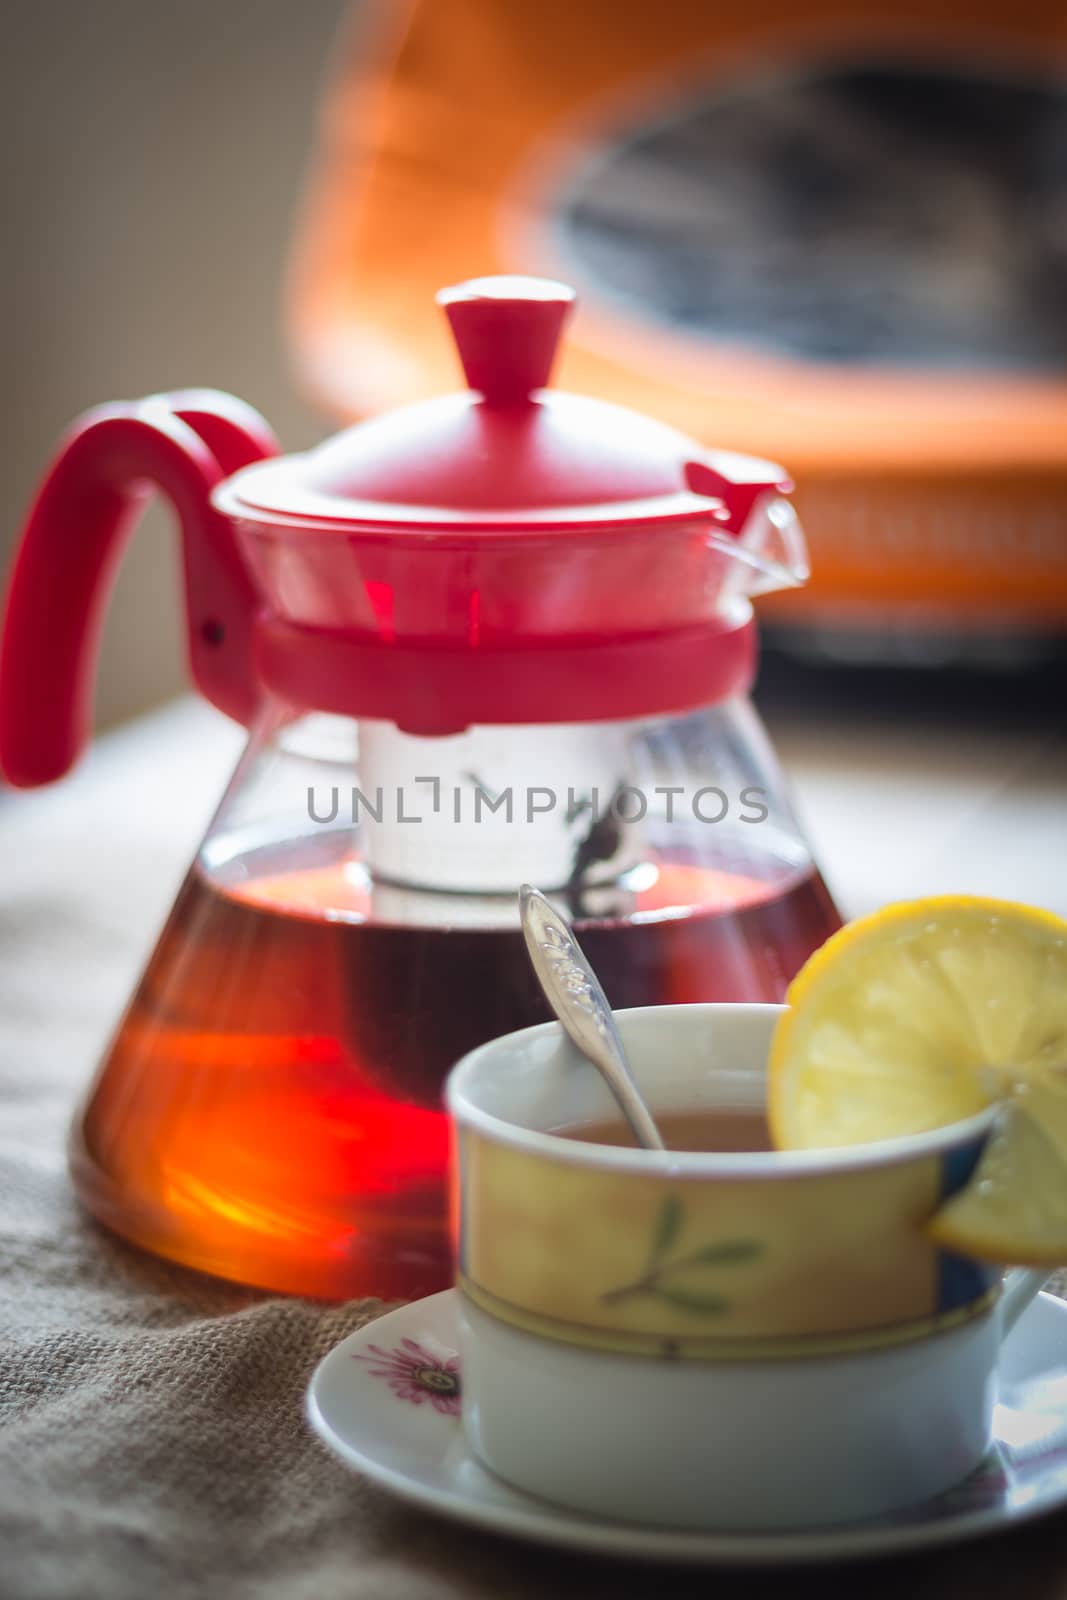 photo blurry view of tea cup with tea kettle